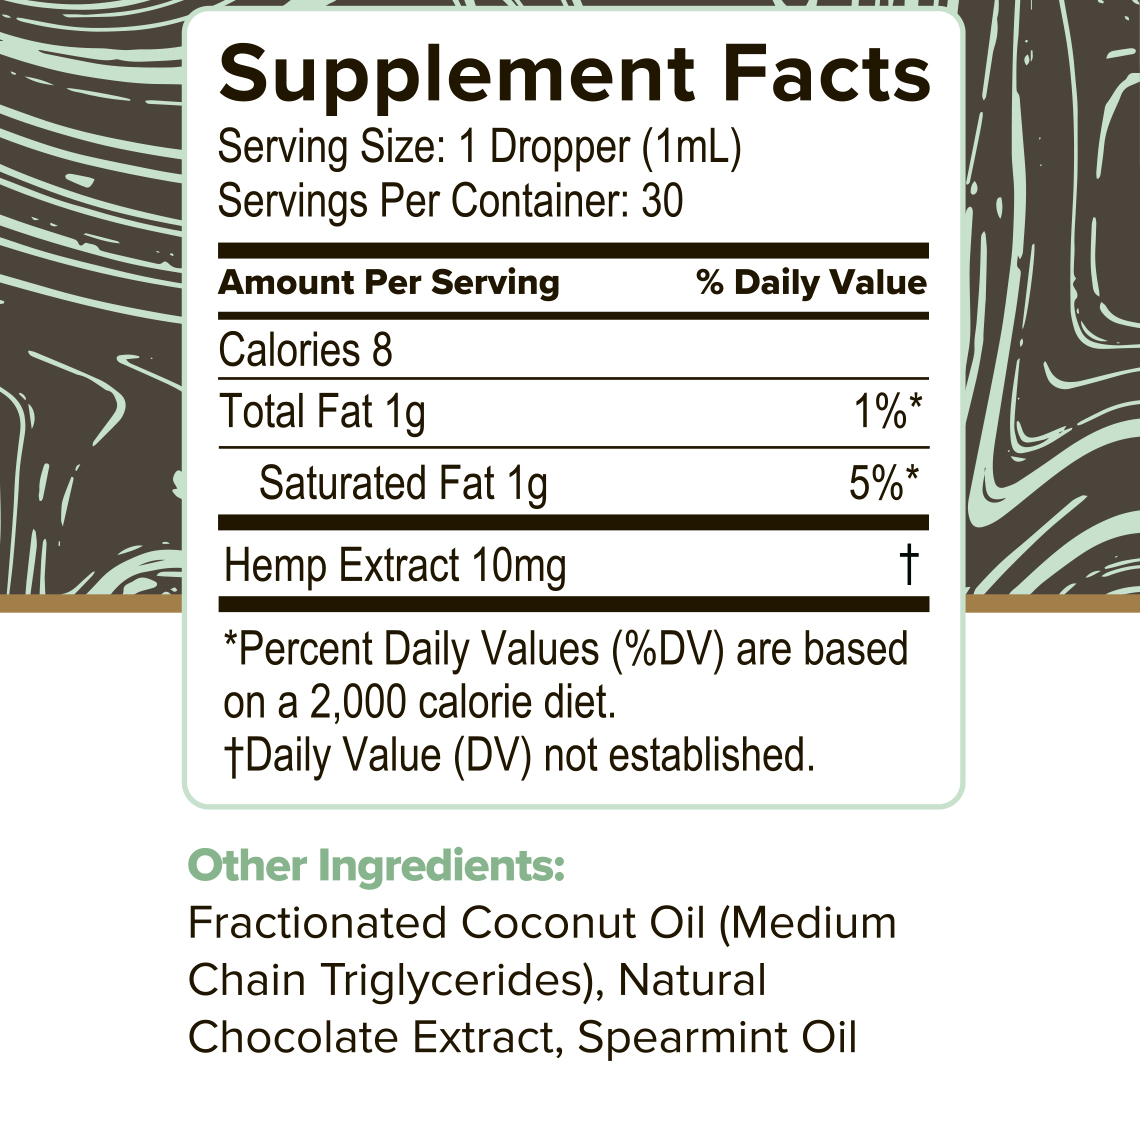 300mg-Chocolate-Mint-Hemp-Extract-label-2 - preview